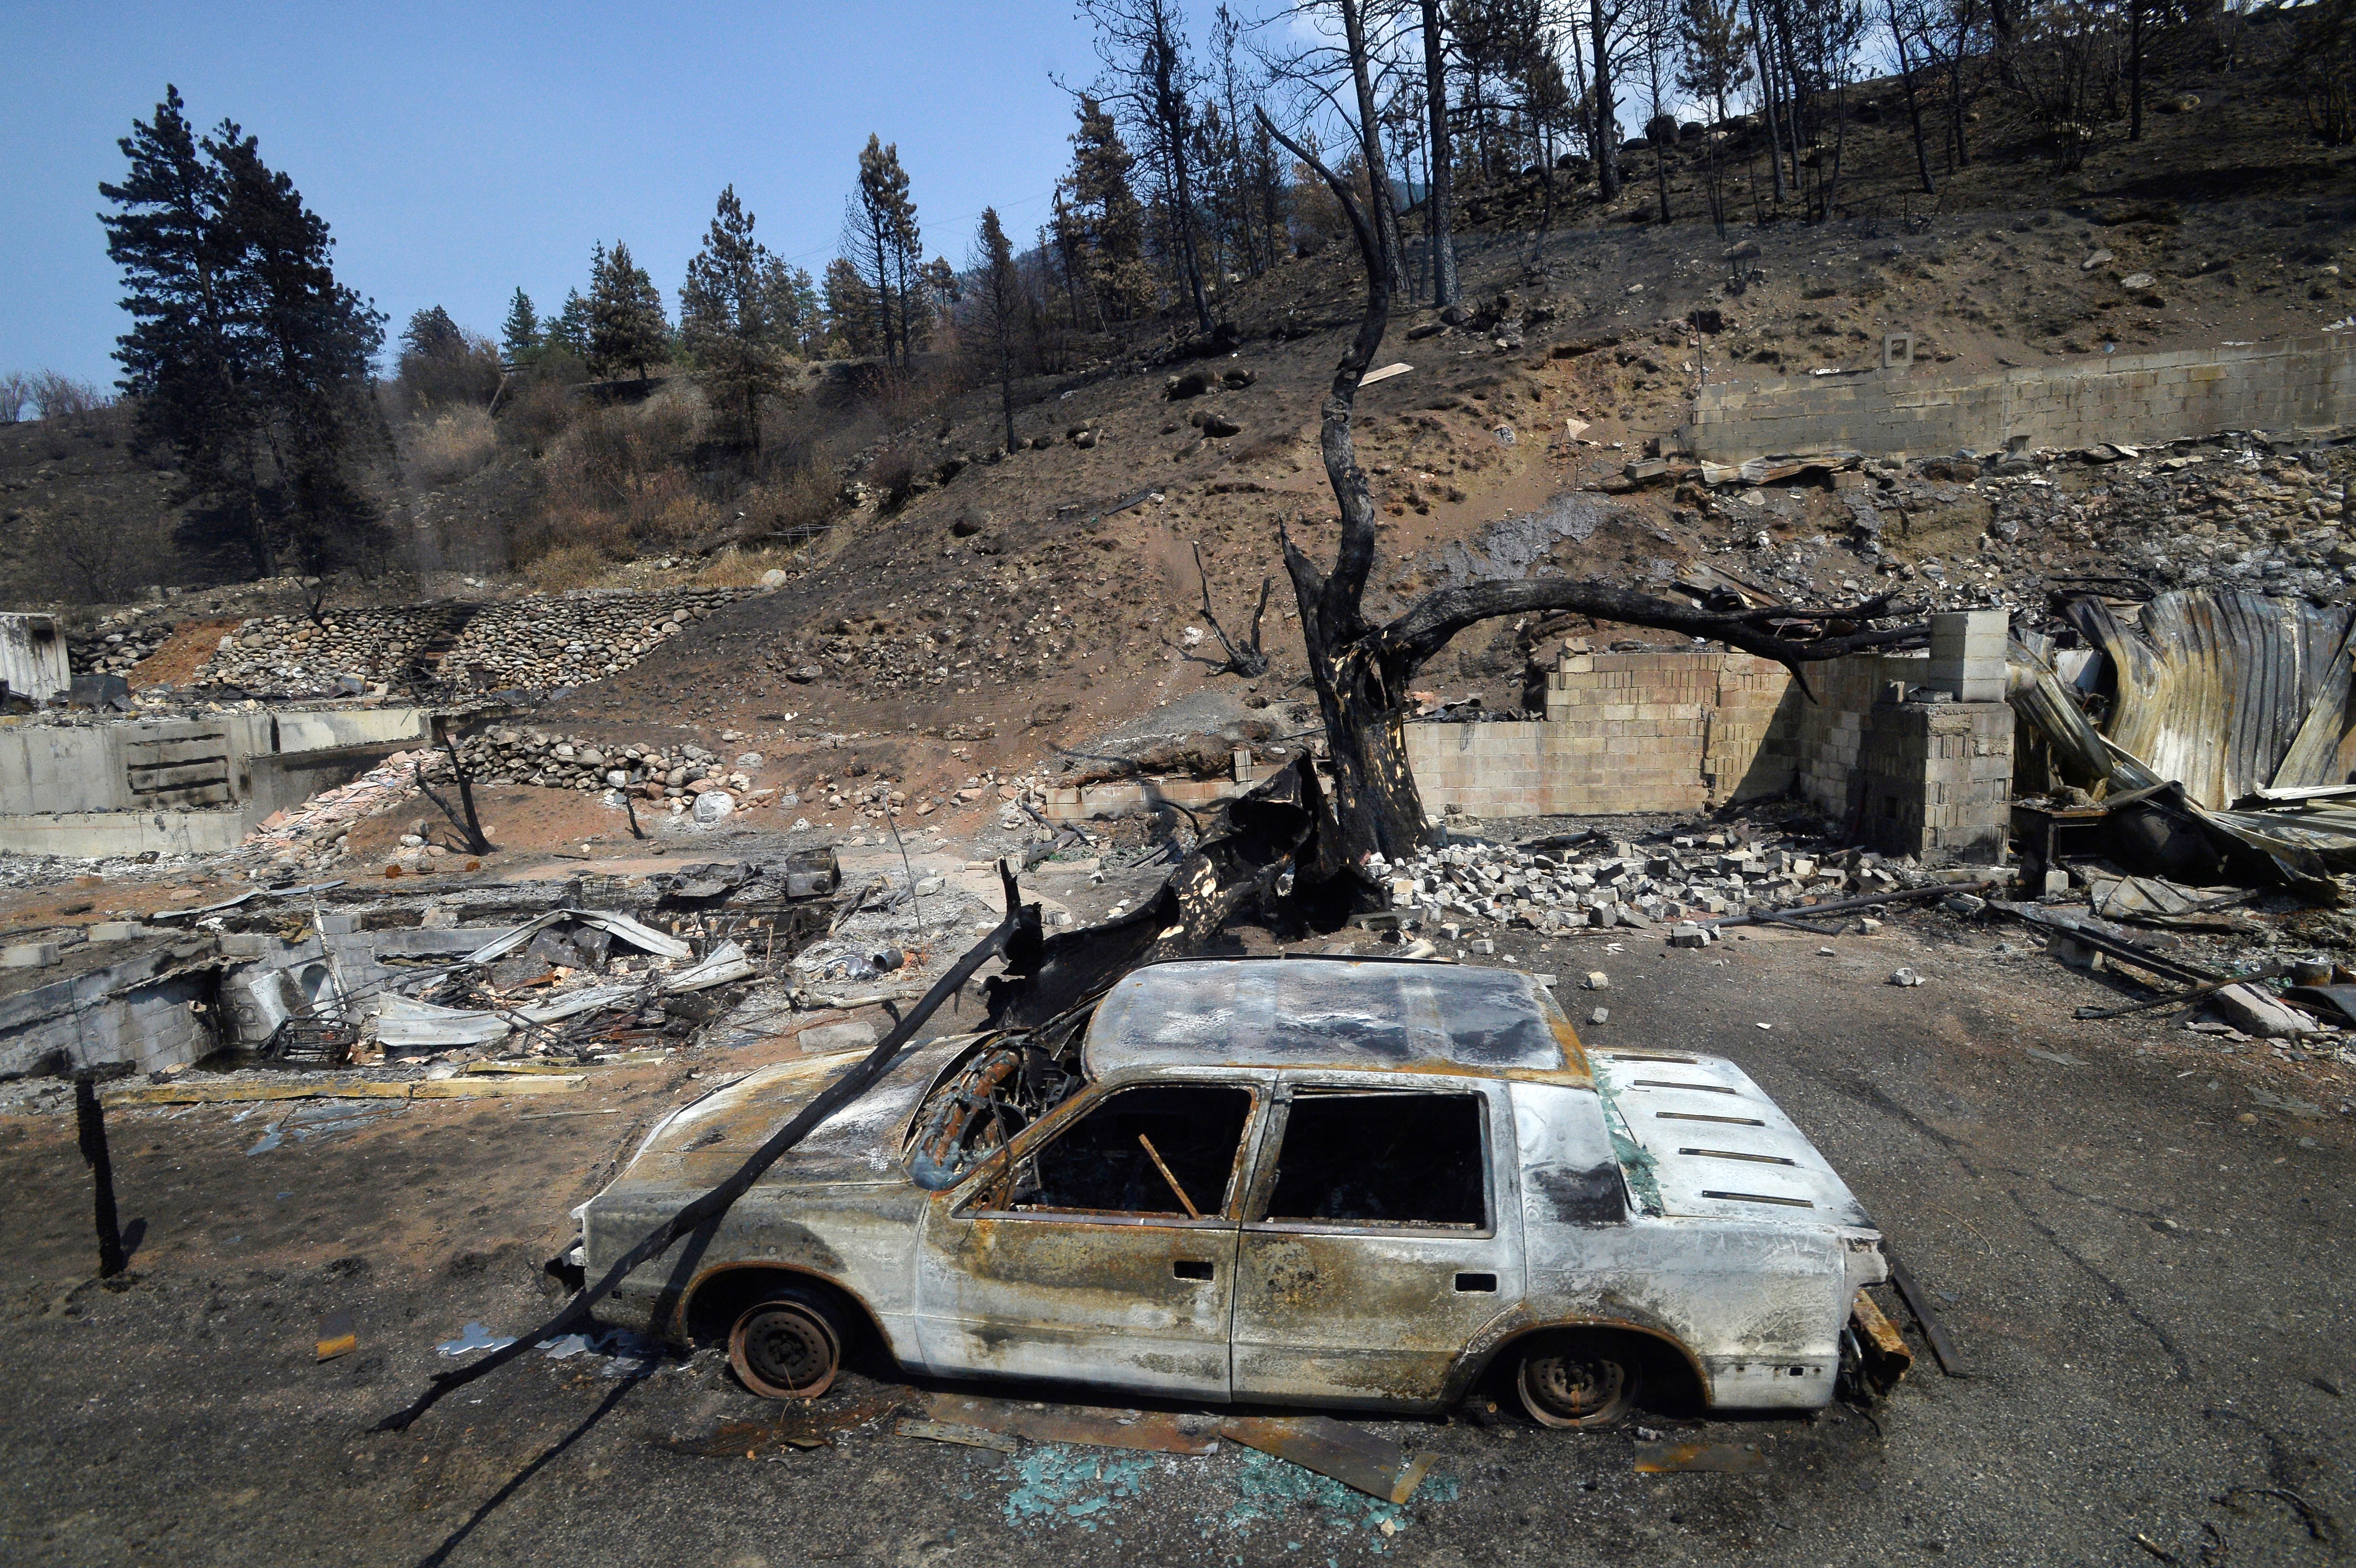 Town of Lytton destroyed by a wildfire